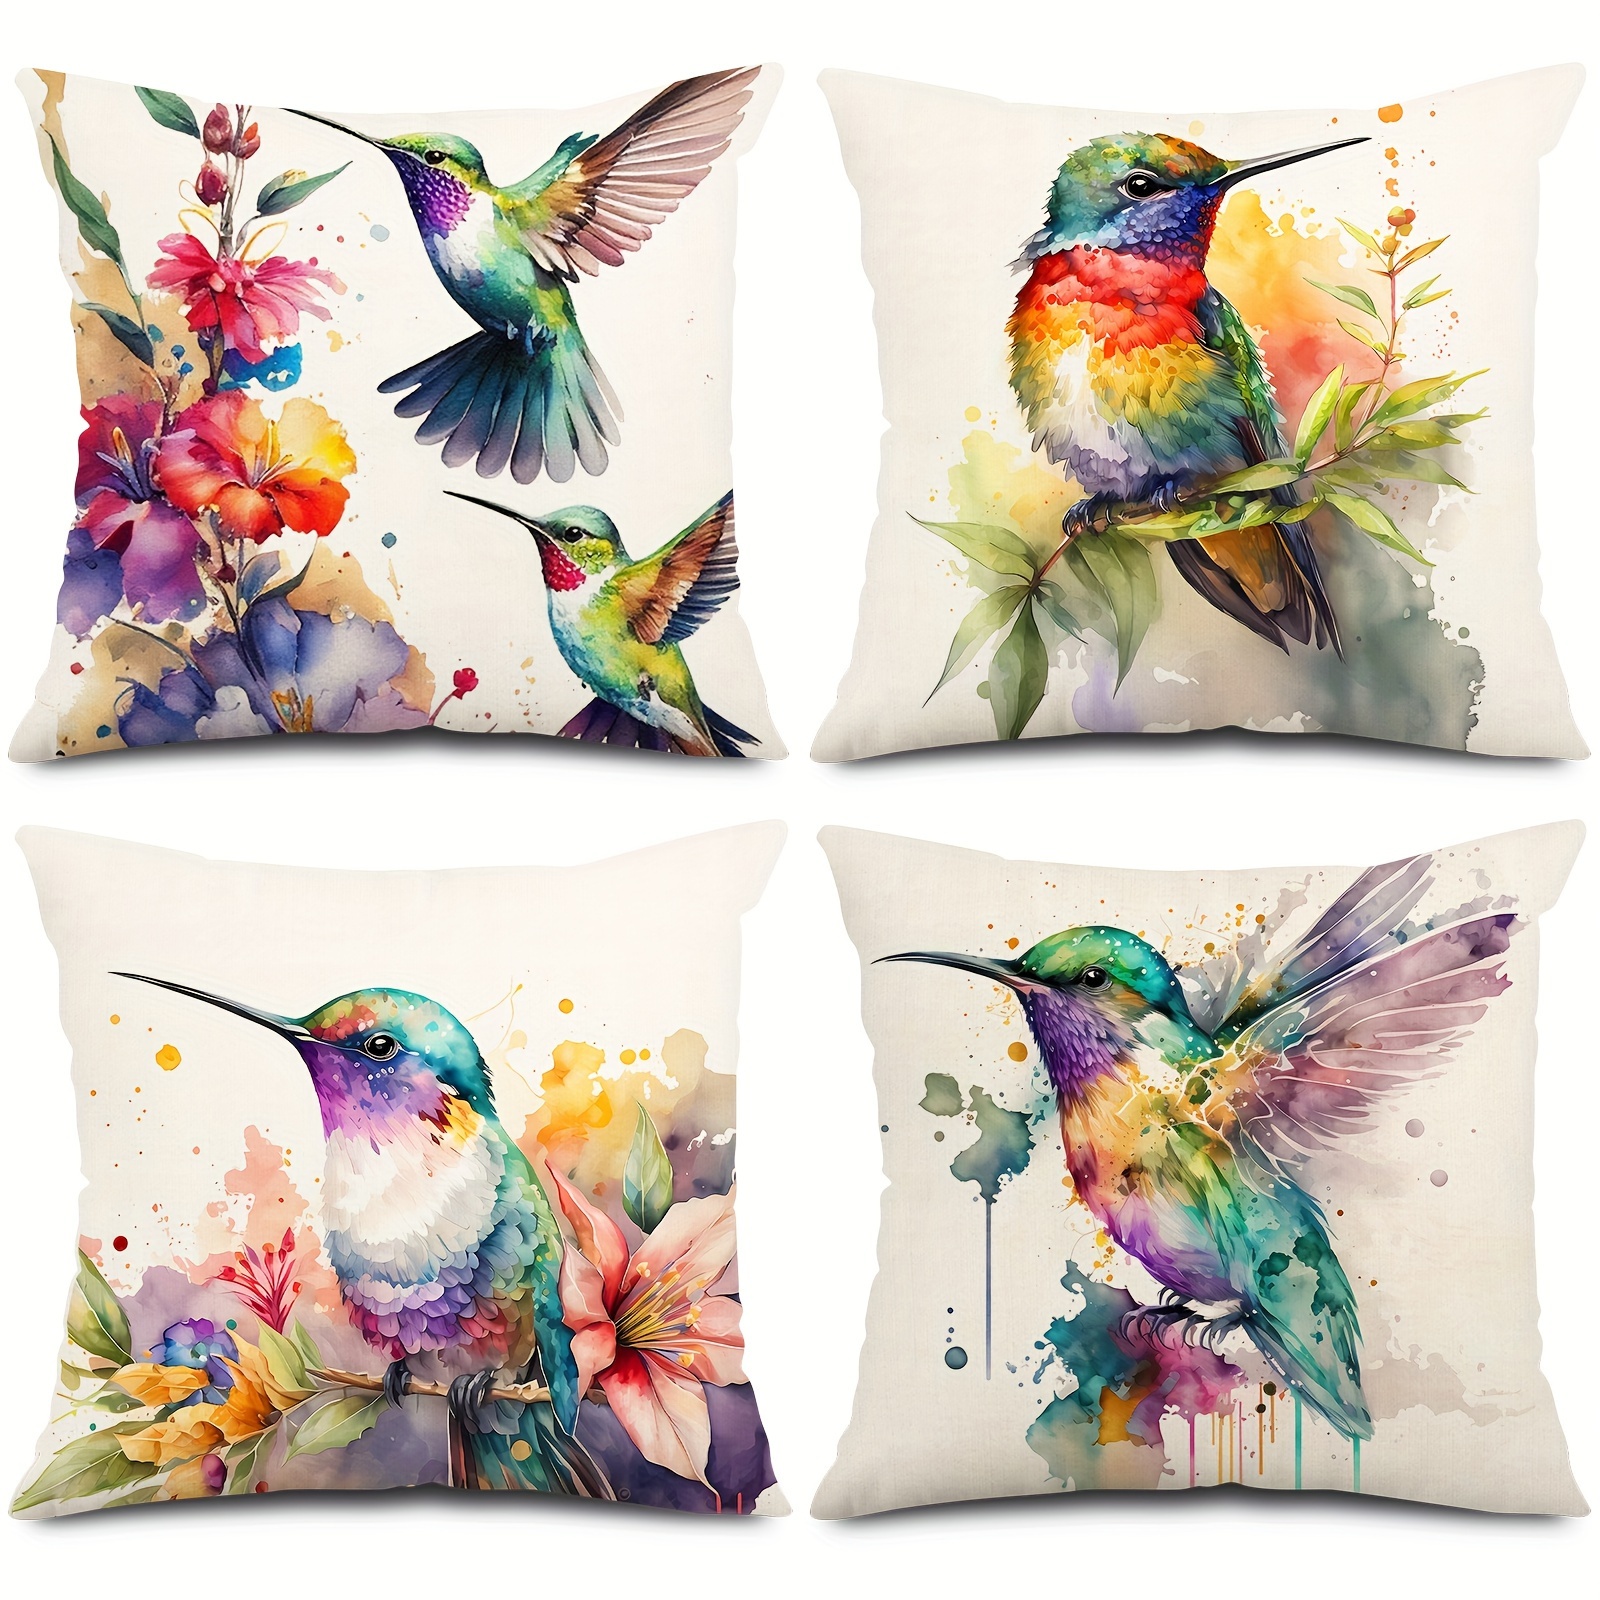 

4-piece Set Of Colorful Hummingbird & Floral Throw Pillow Covers - Contemporary Linen Cushion Cases With Zipper Closure For Sofa, Bed, And Home Decor Decorative Pillows Pillows Decorative